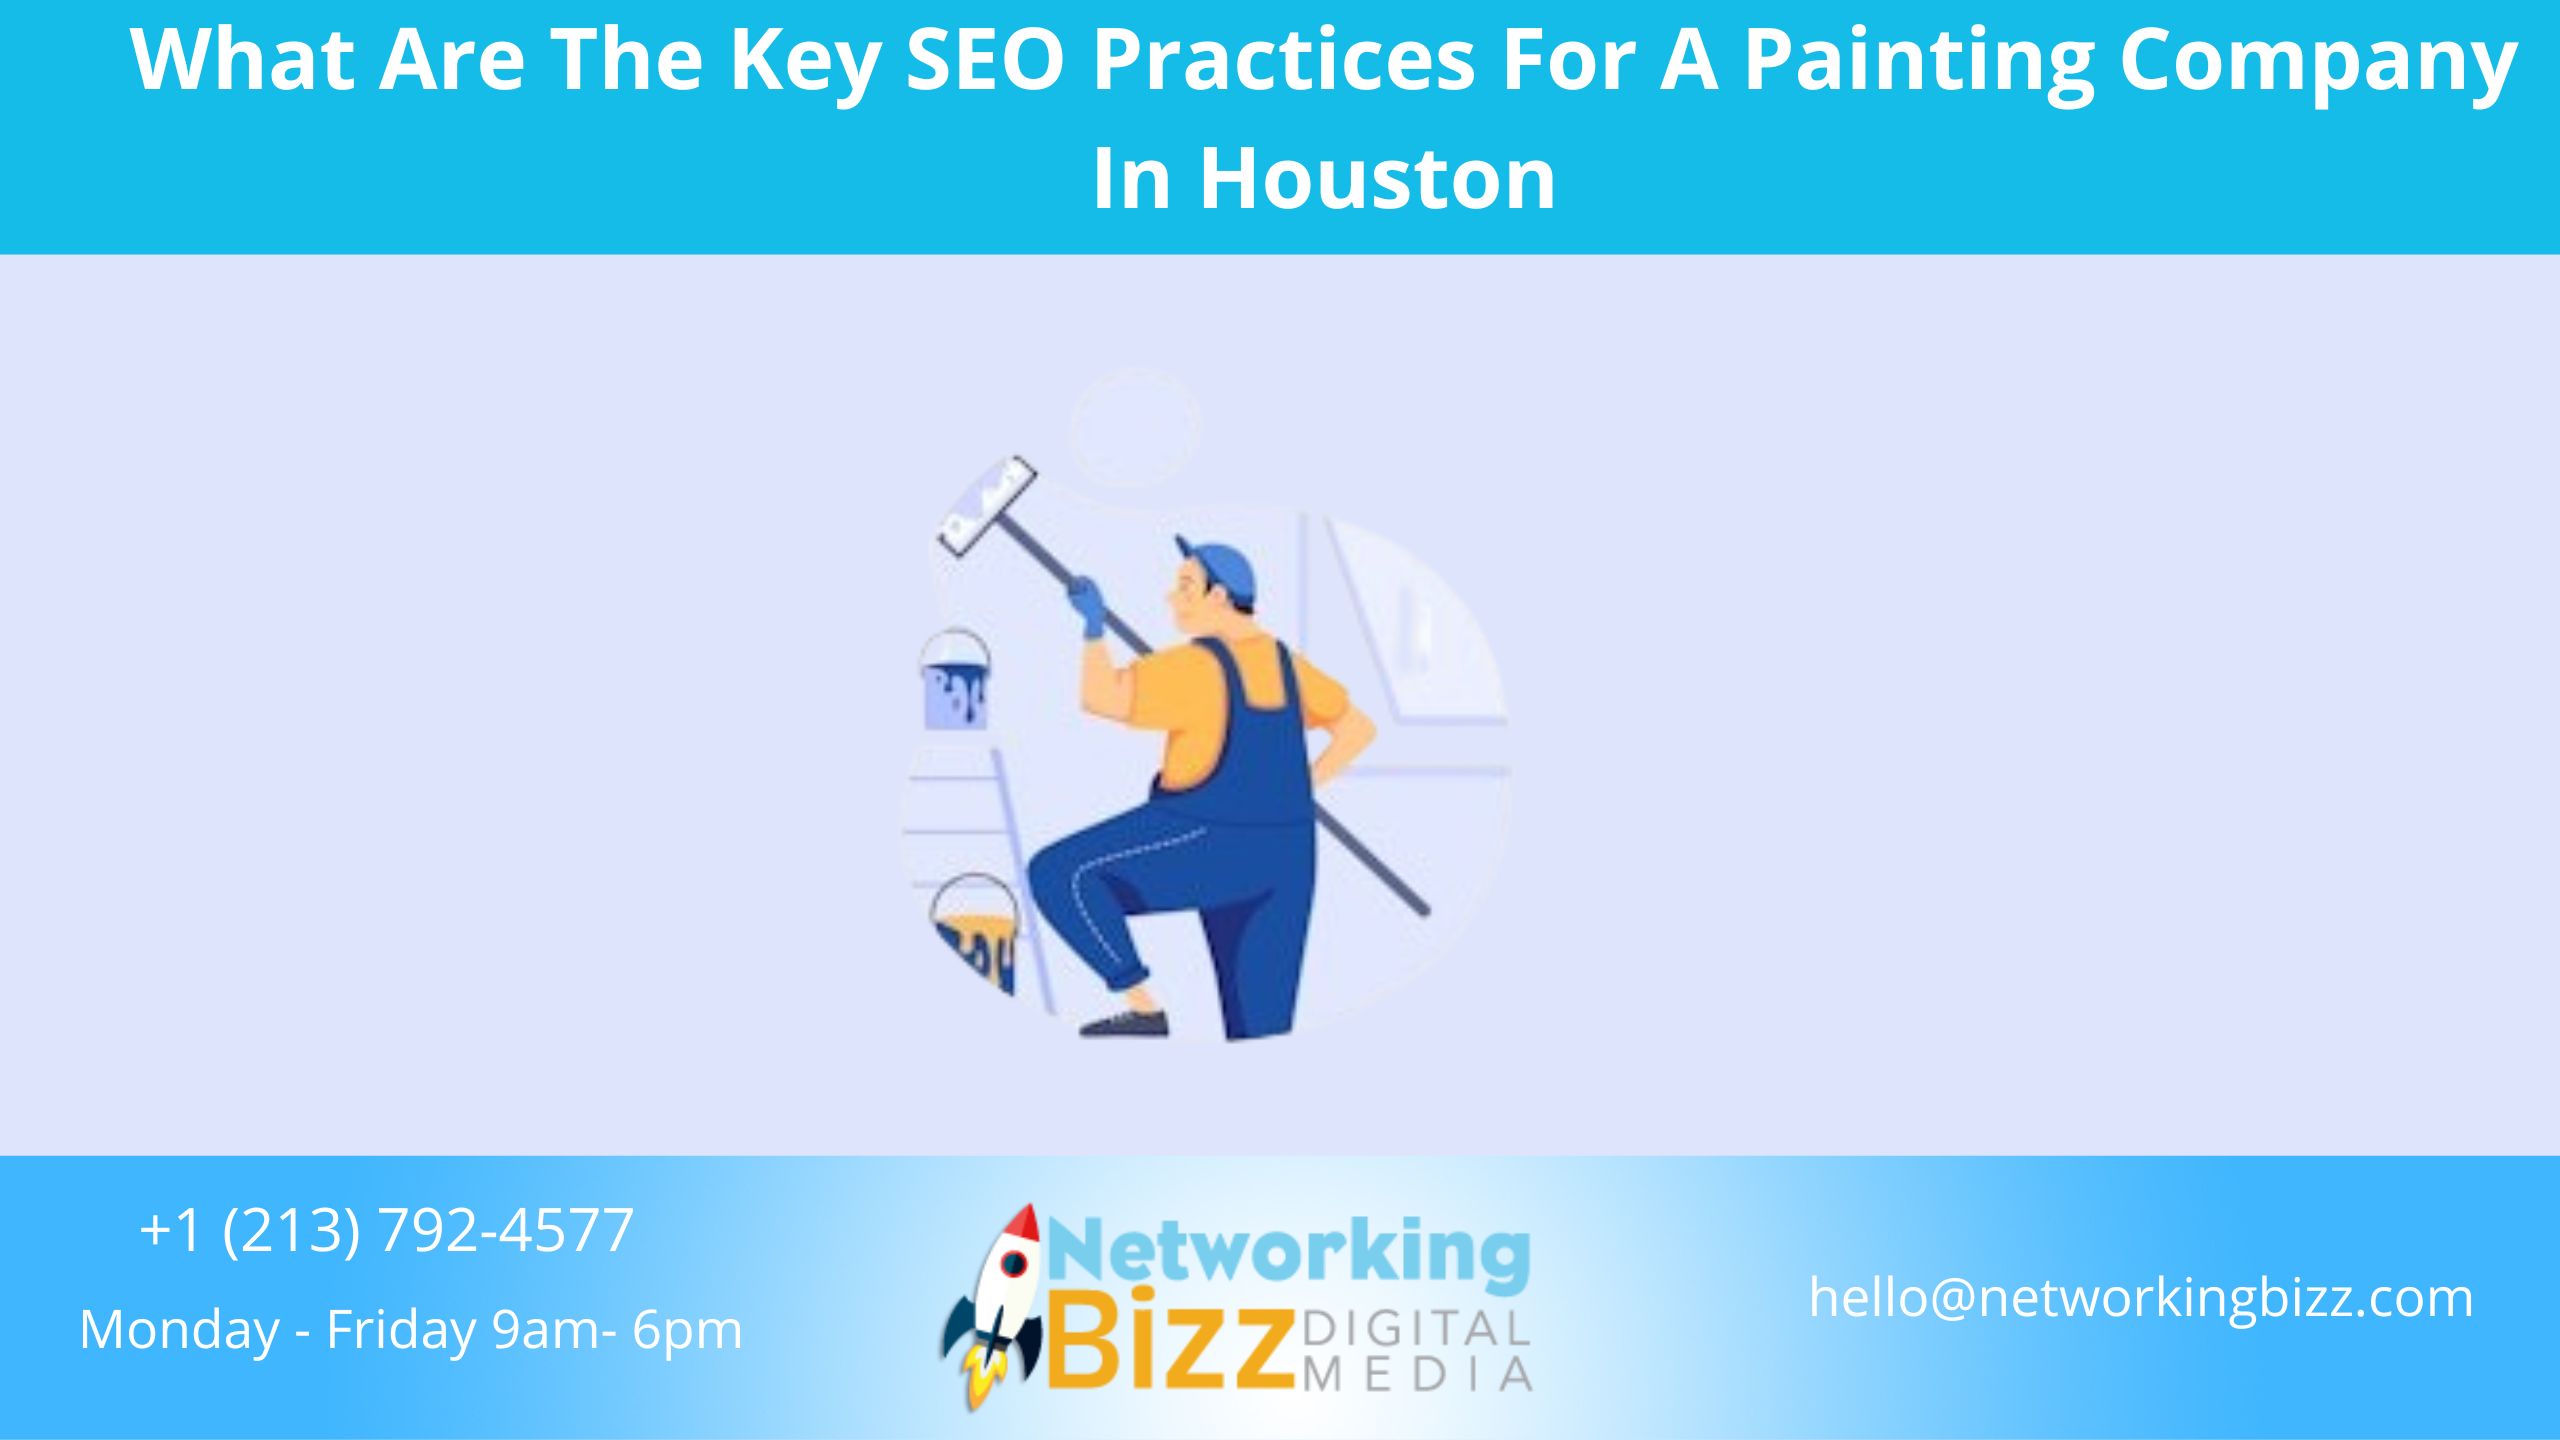 What Are The Key SEO Practices For A Painting Company In Houston